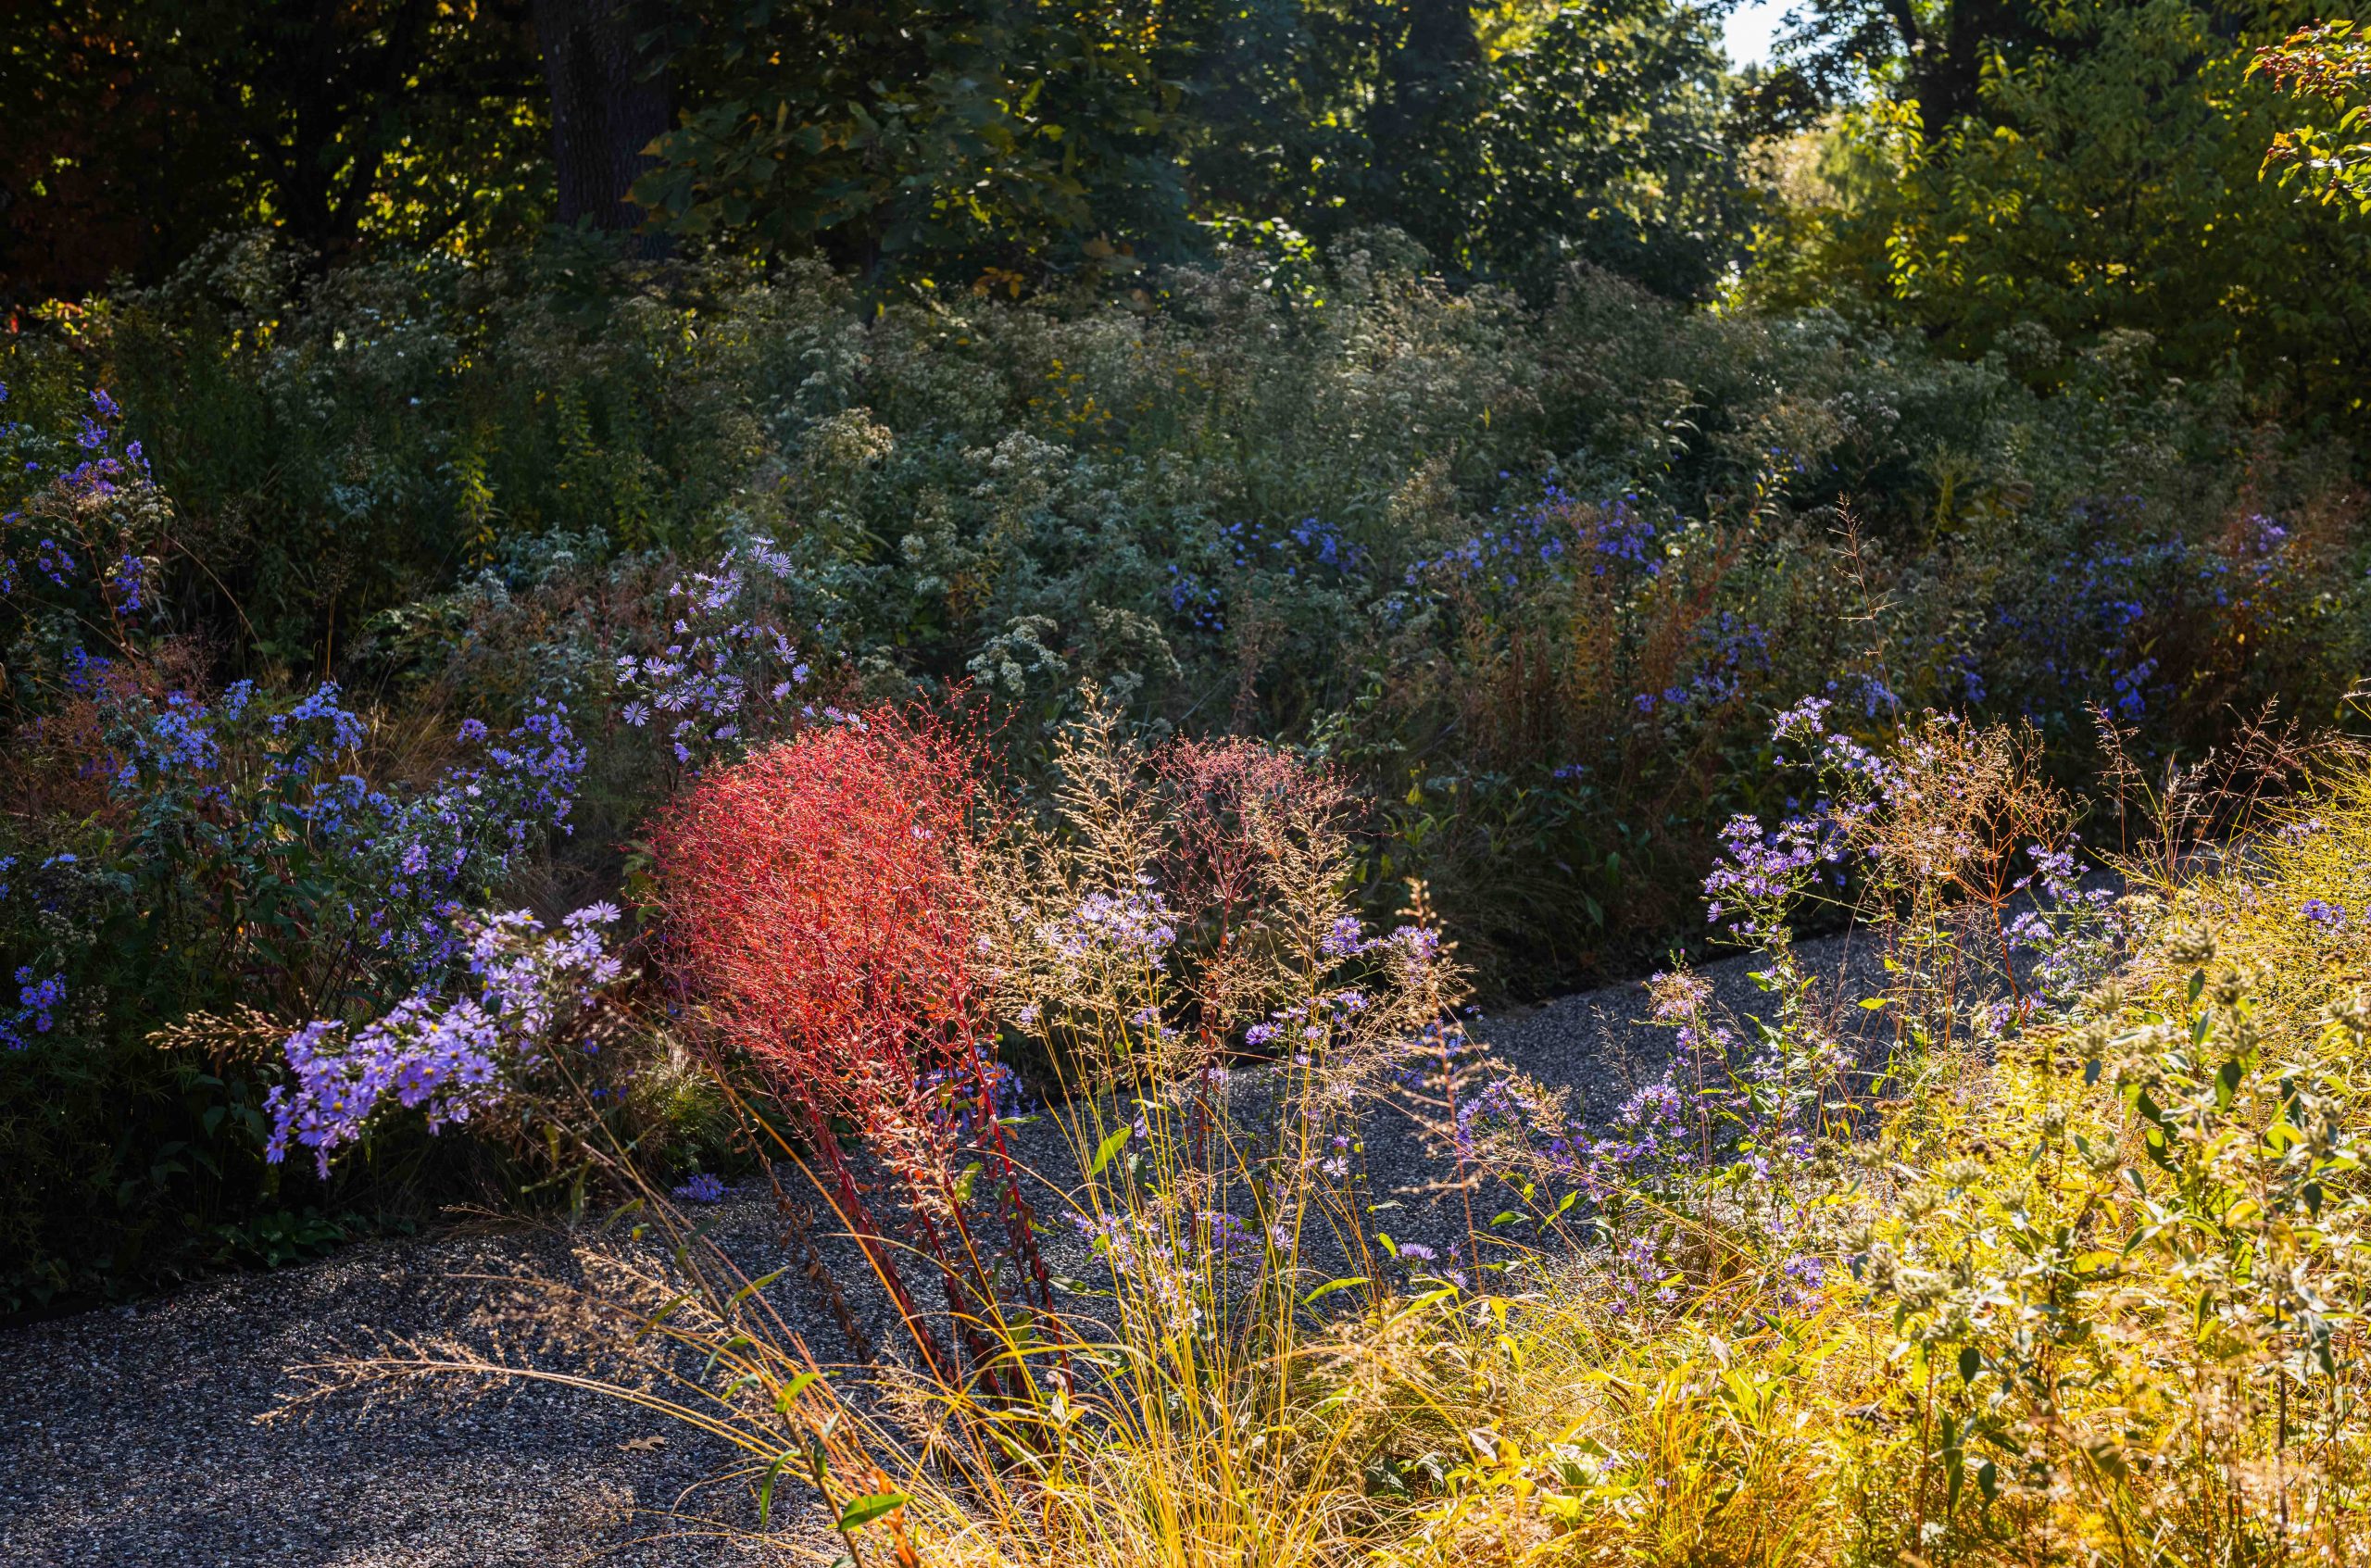 Small yellow shrubs and purple flowers line a meandering garden path